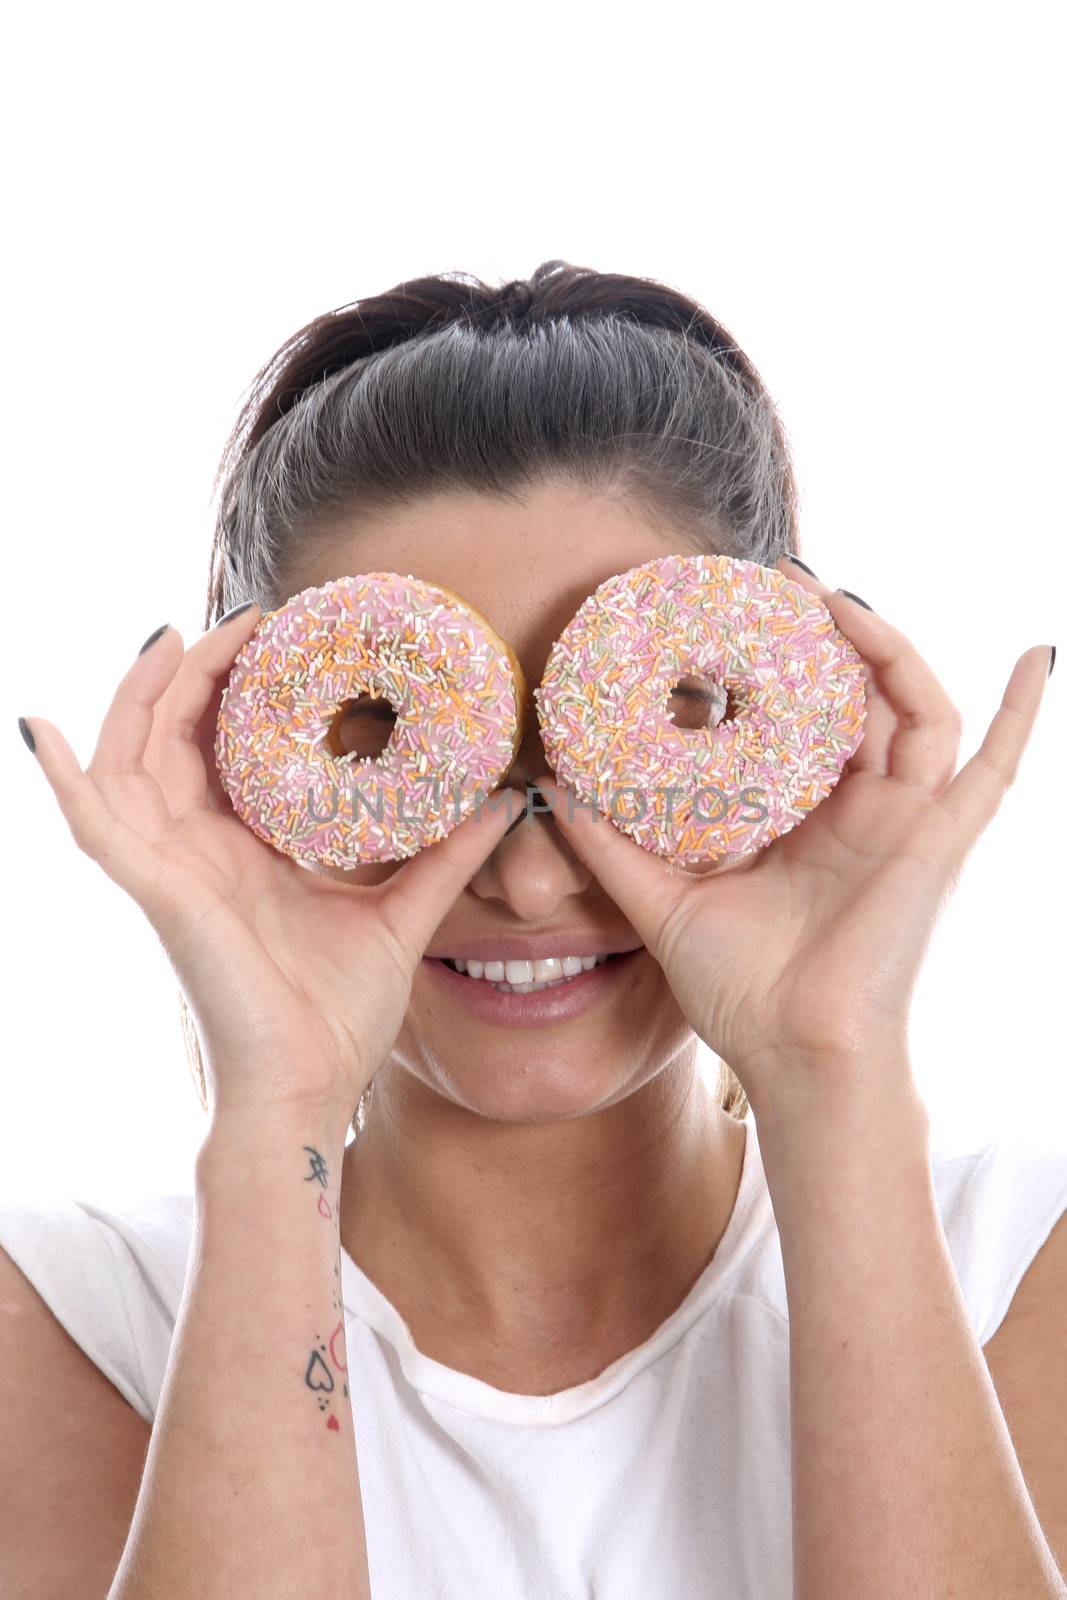 Model Released. Young Woman Holding Ring Donuts